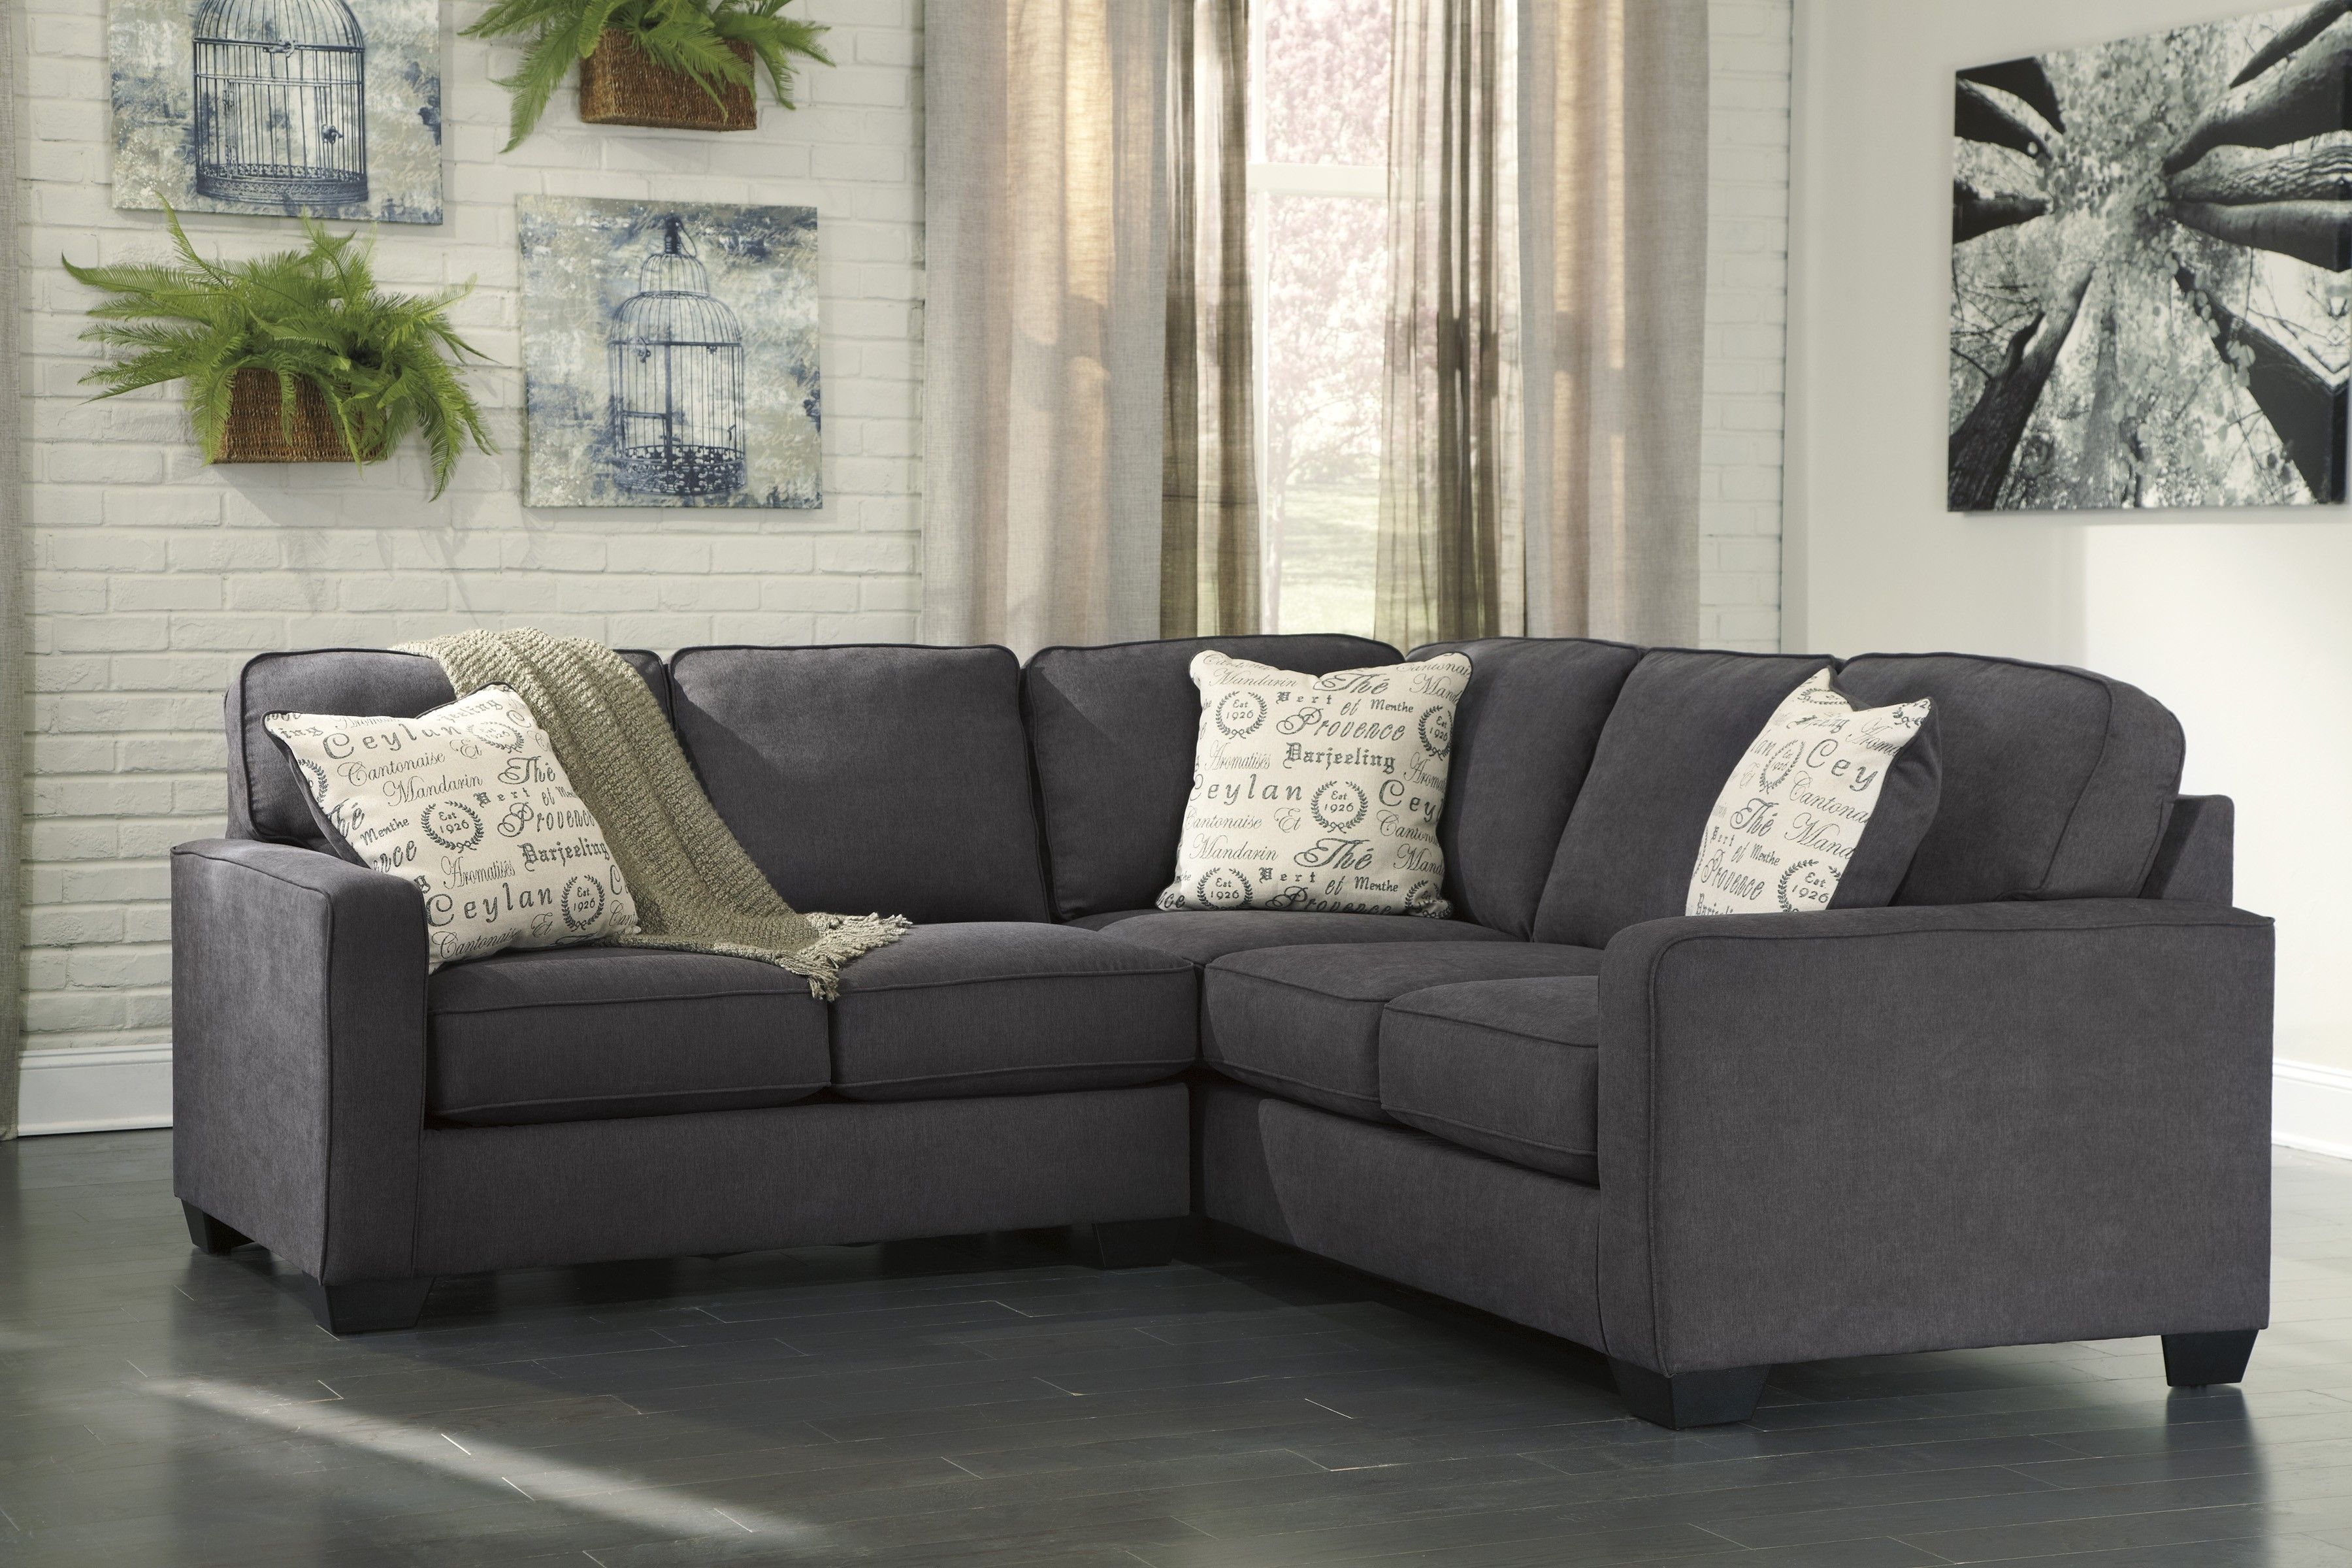 Alenya Charcoal 2 Piece Sectional Sofa For $ (View 2 of 10)